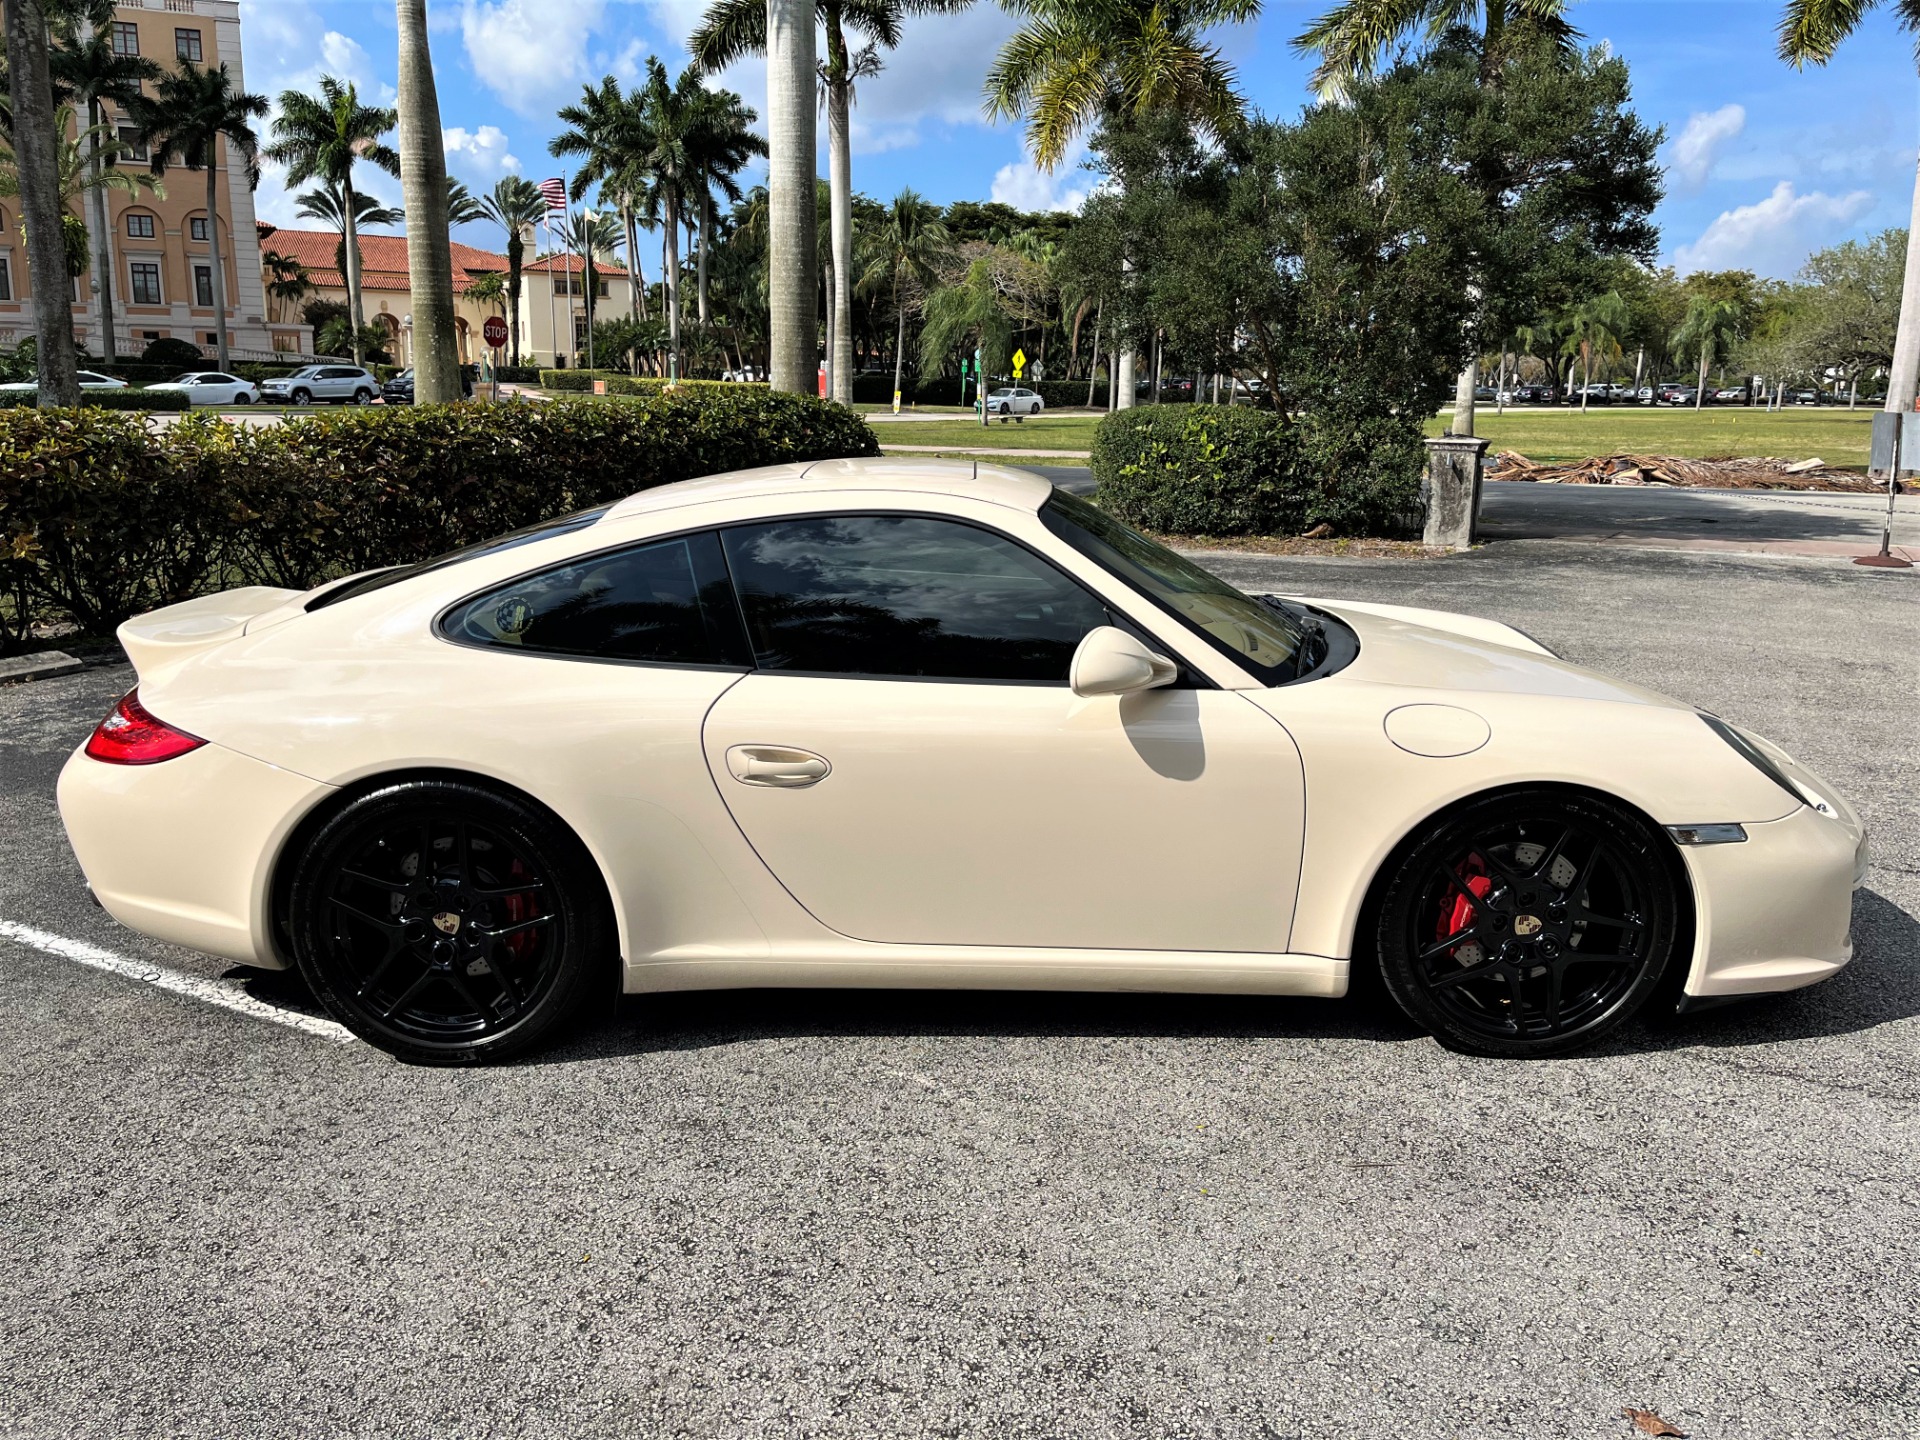 Used 2010 Porsche 911 Carrera S for sale Sold at The Gables Sports Cars in Miami FL 33146 2